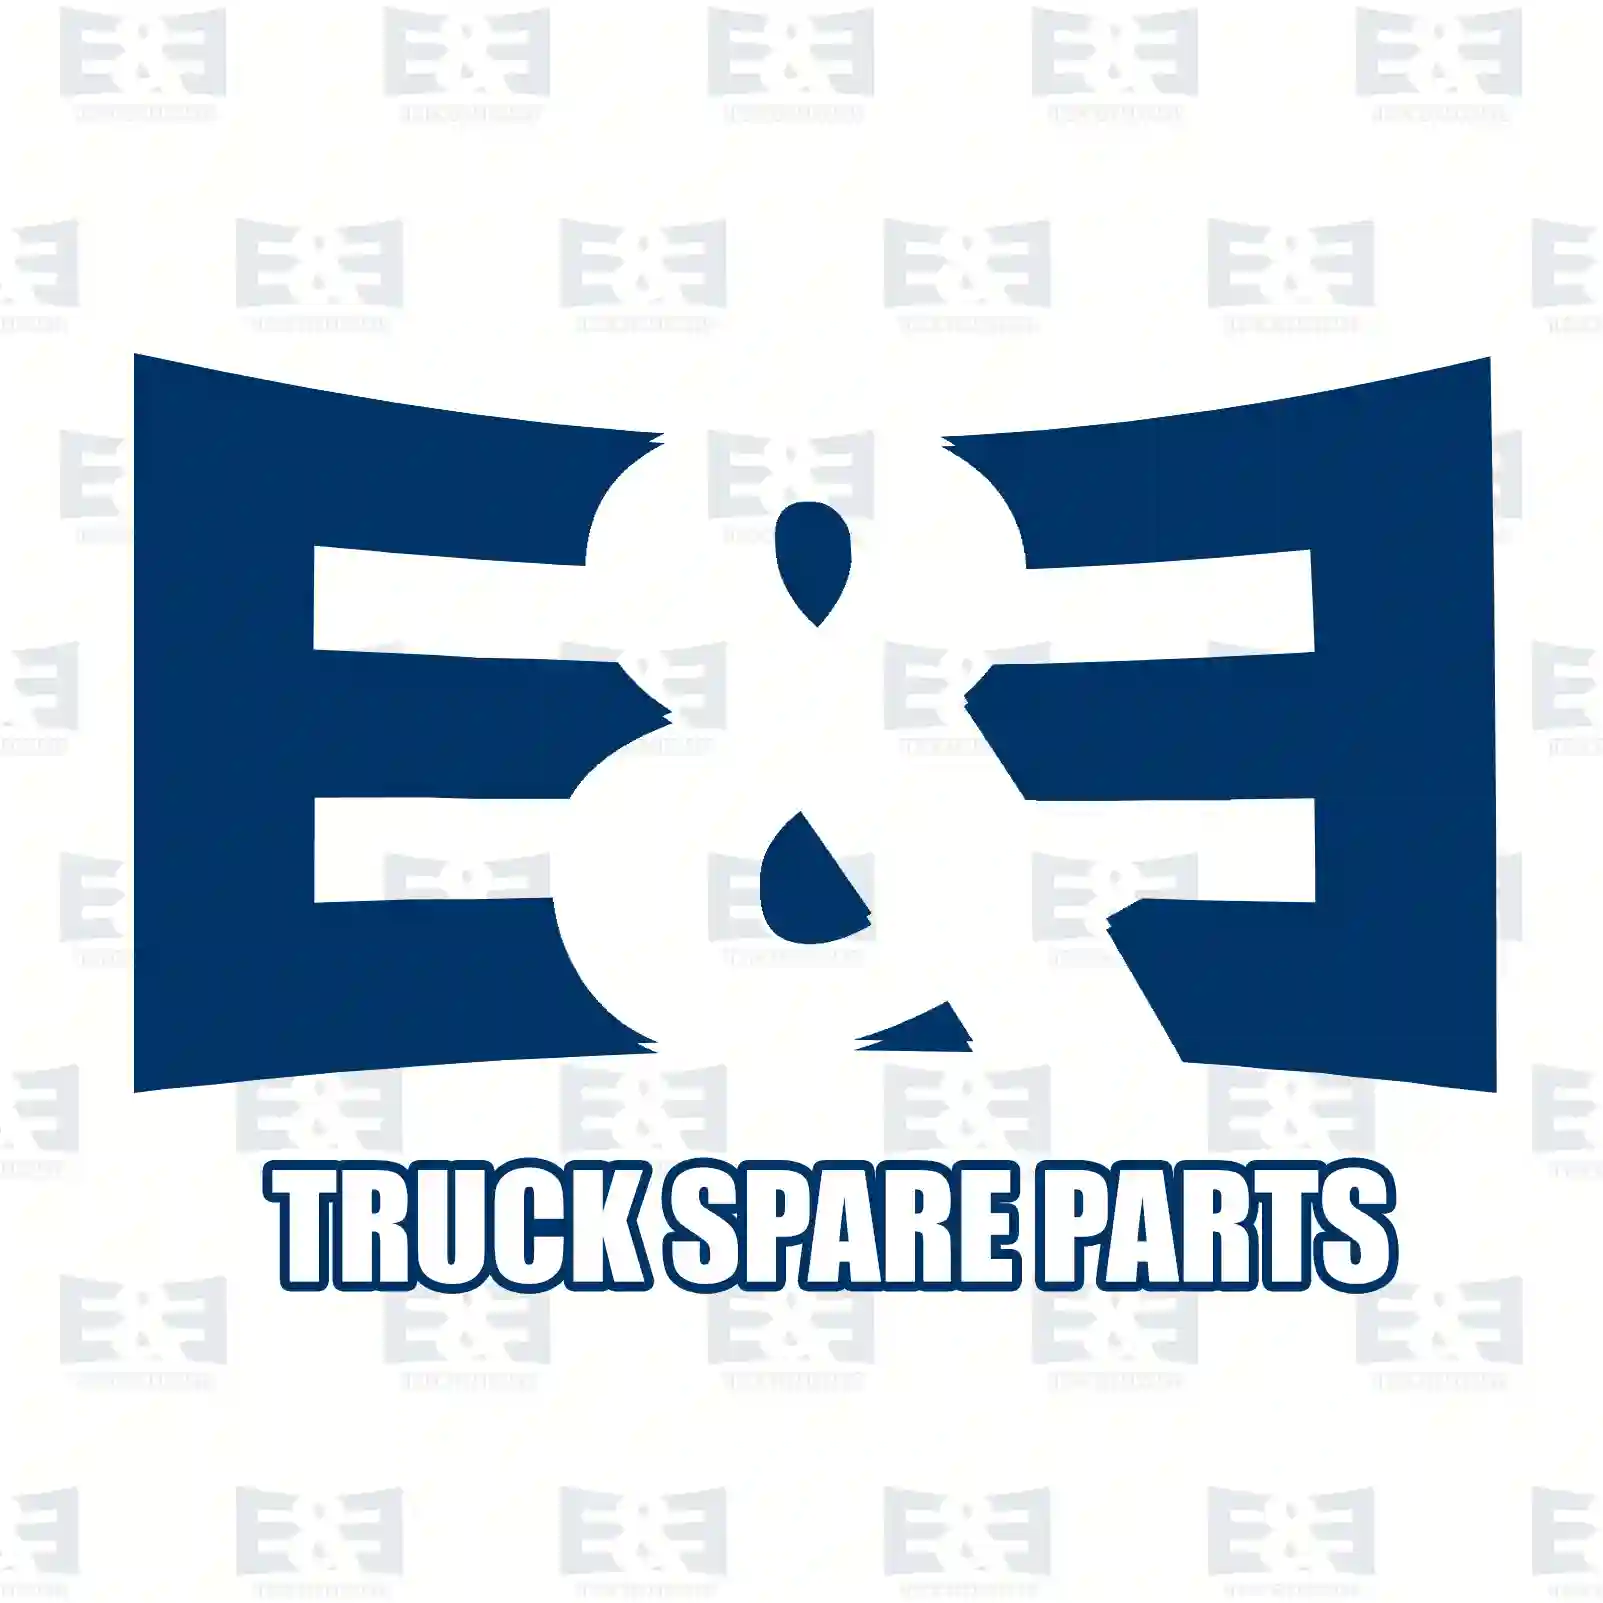  Disc brake pad kit, without accessories || E&E Truck Spare Parts | Truck Spare Parts, Auotomotive Spare Parts